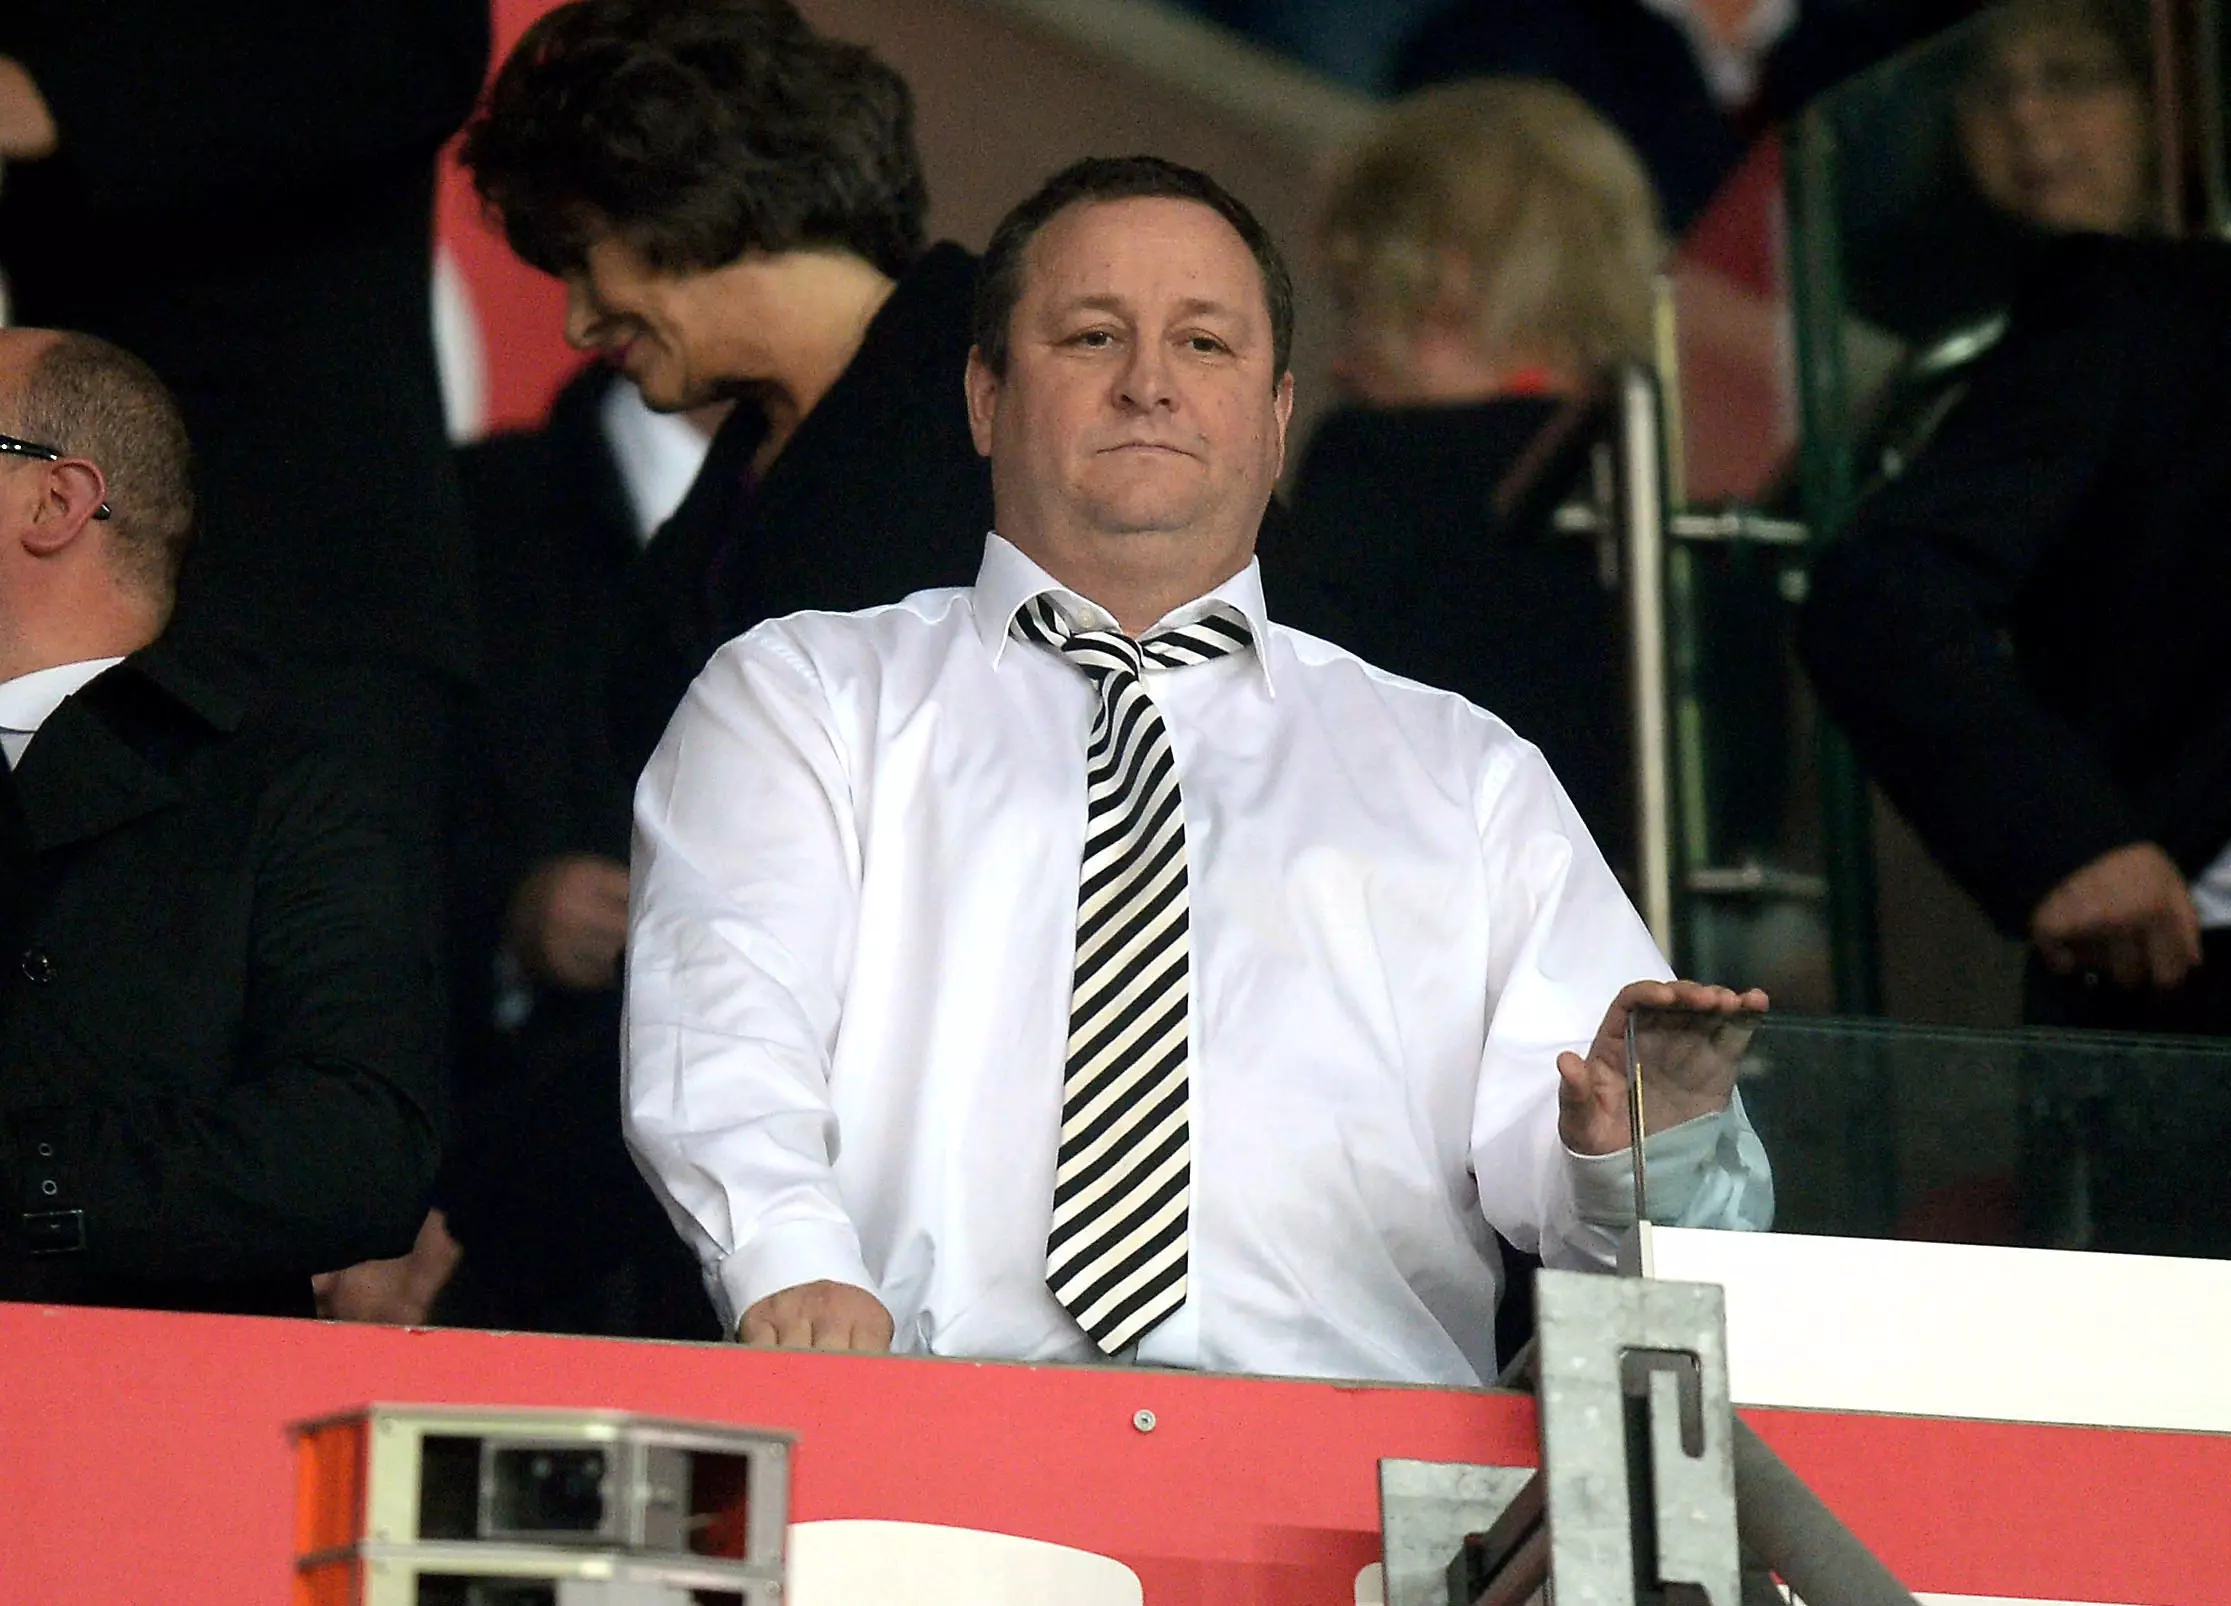 Ashley has not been a popular figure at St James' Park. Image: PA Images